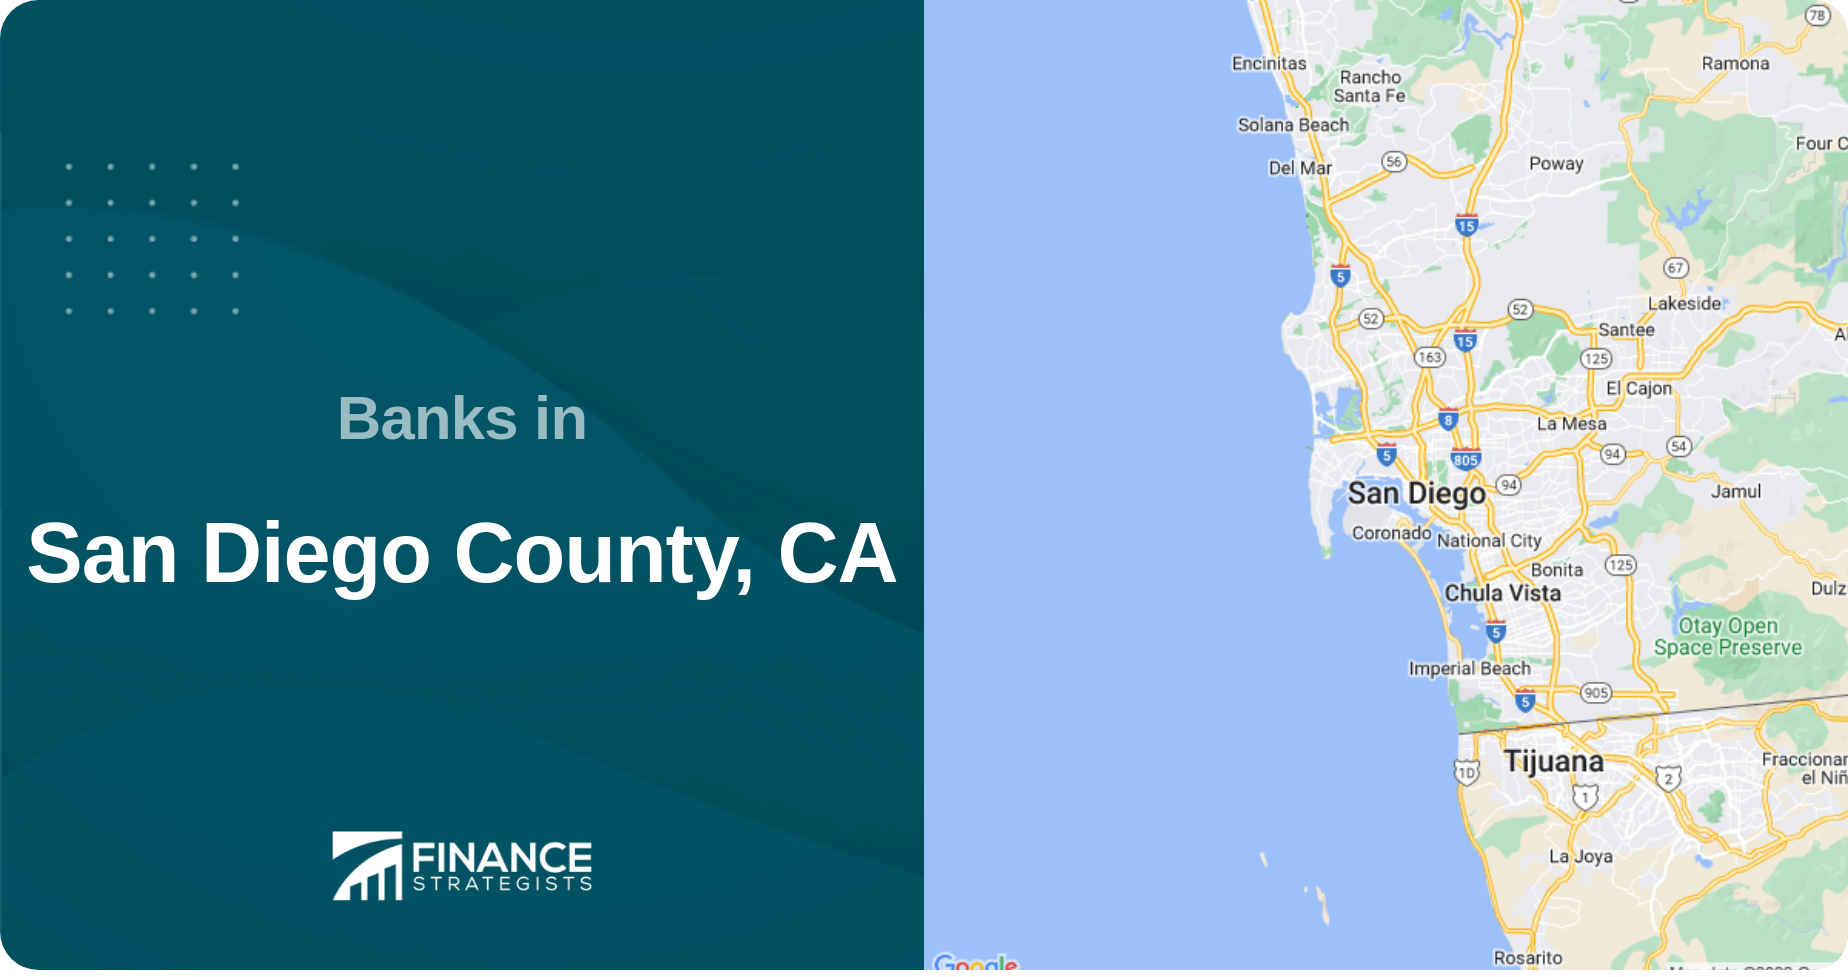 Banks in San Diego County, CA